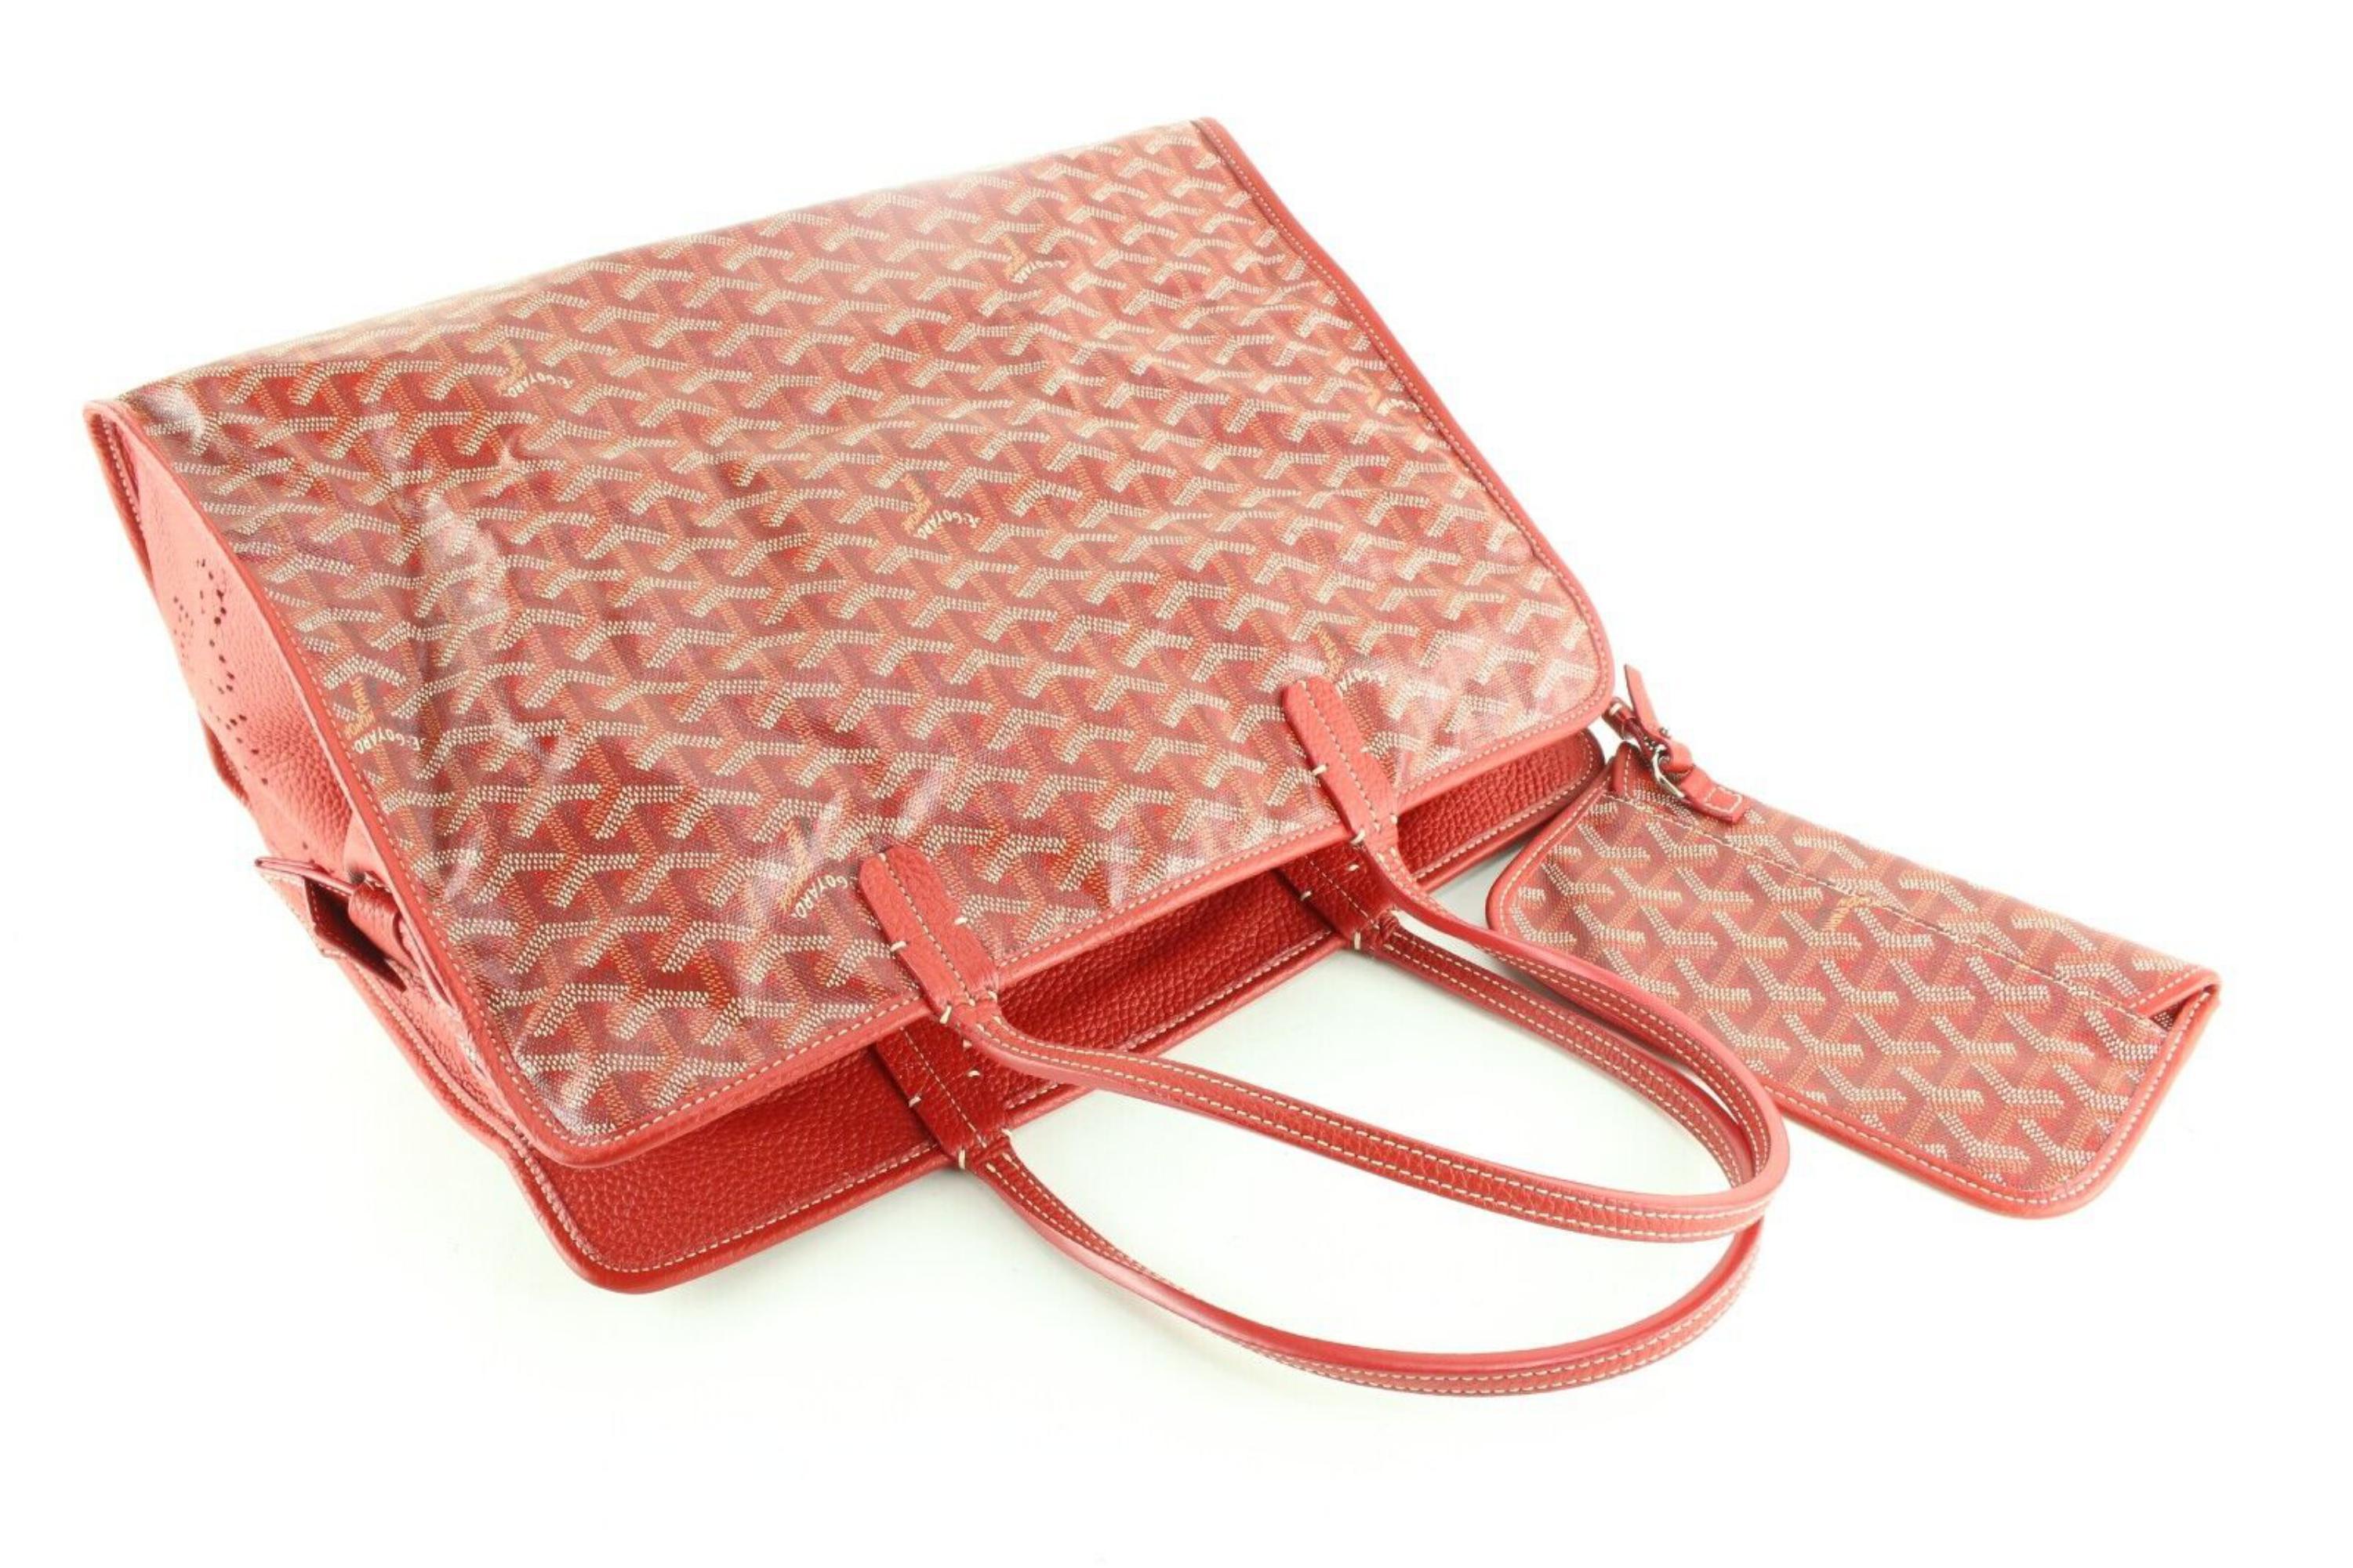 Goyard Red Chevron Sac Hardy Pet Carrier With Pouch 2GY0301 2